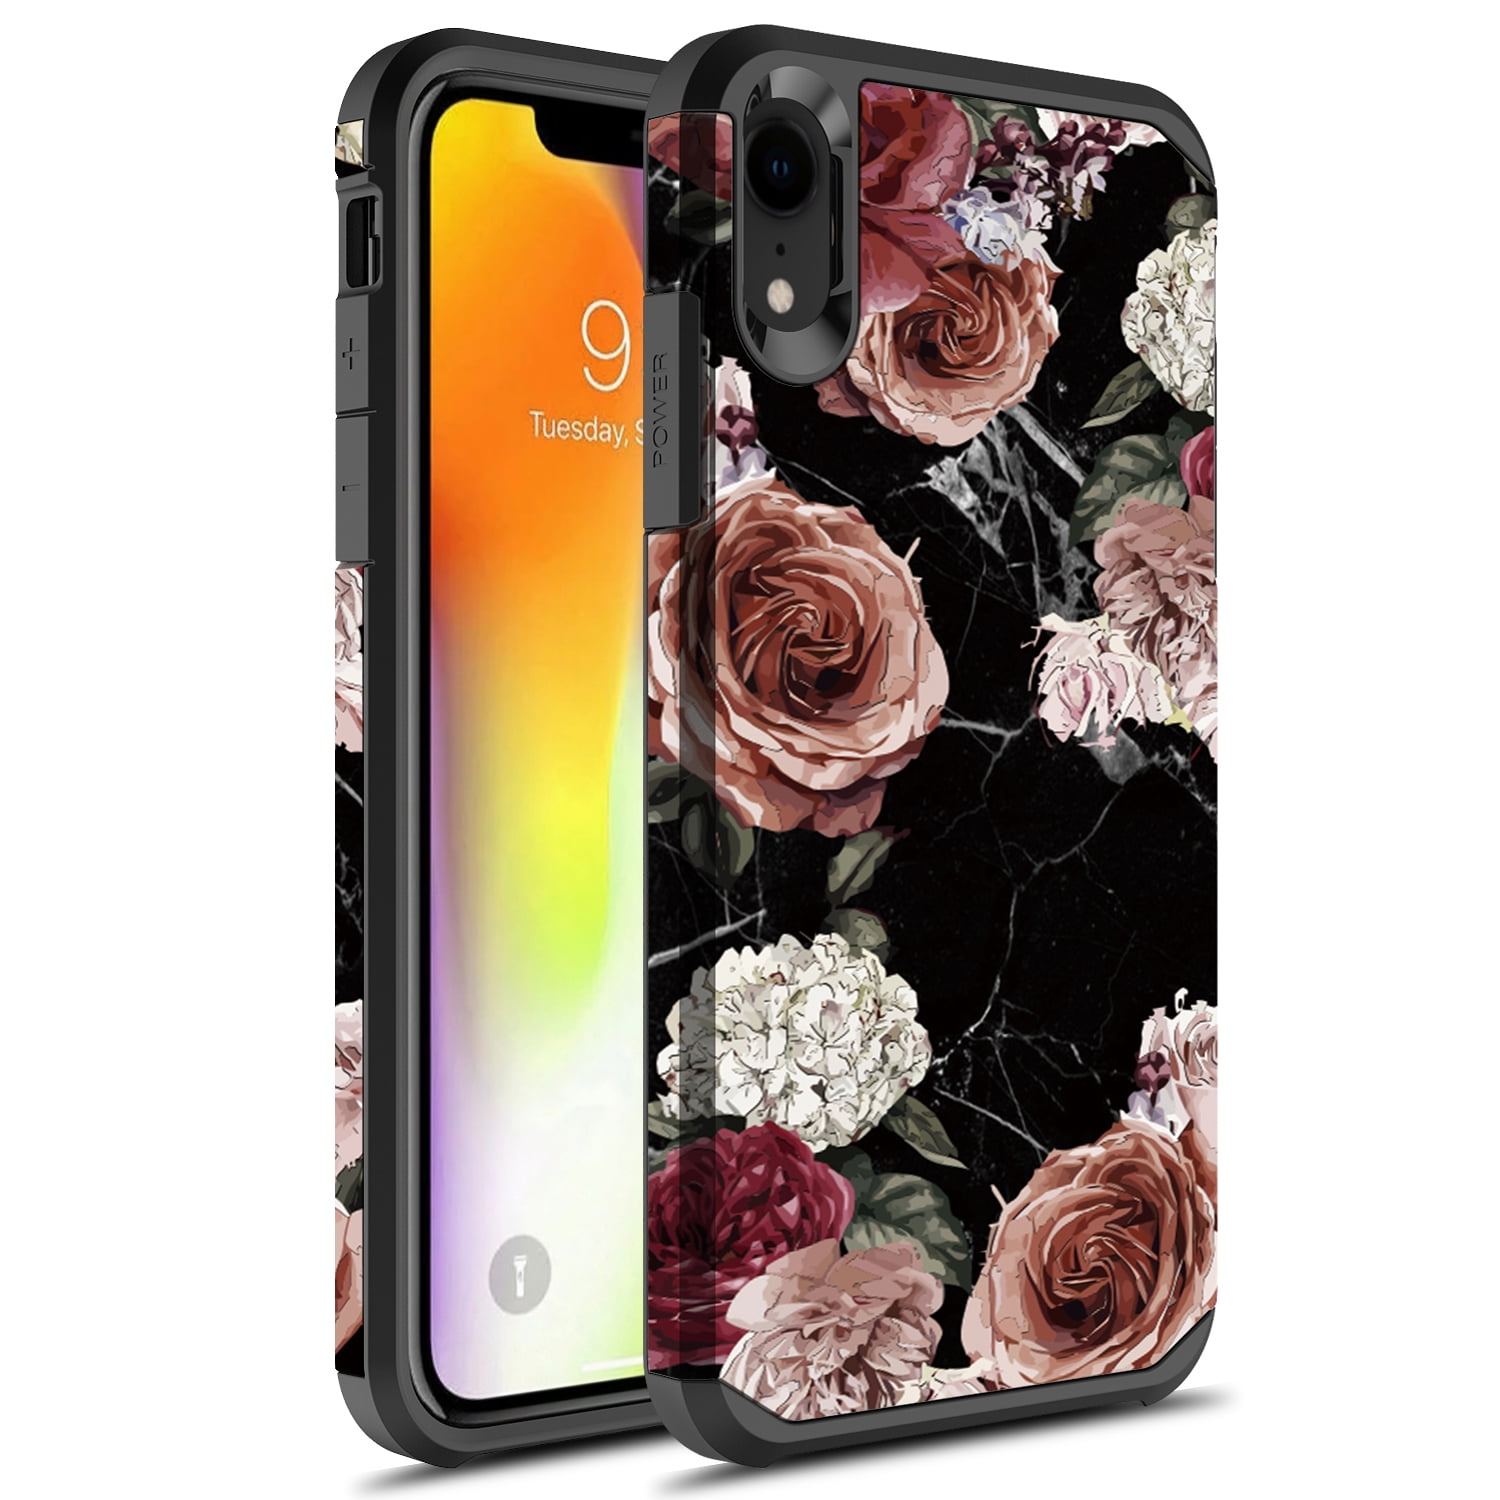 iPhone XR Case, Rosebono Slim Hybrid Dual Layer Graphic Fashion Colorful Cover Armor Case for Apple iPhone XR (Flower)